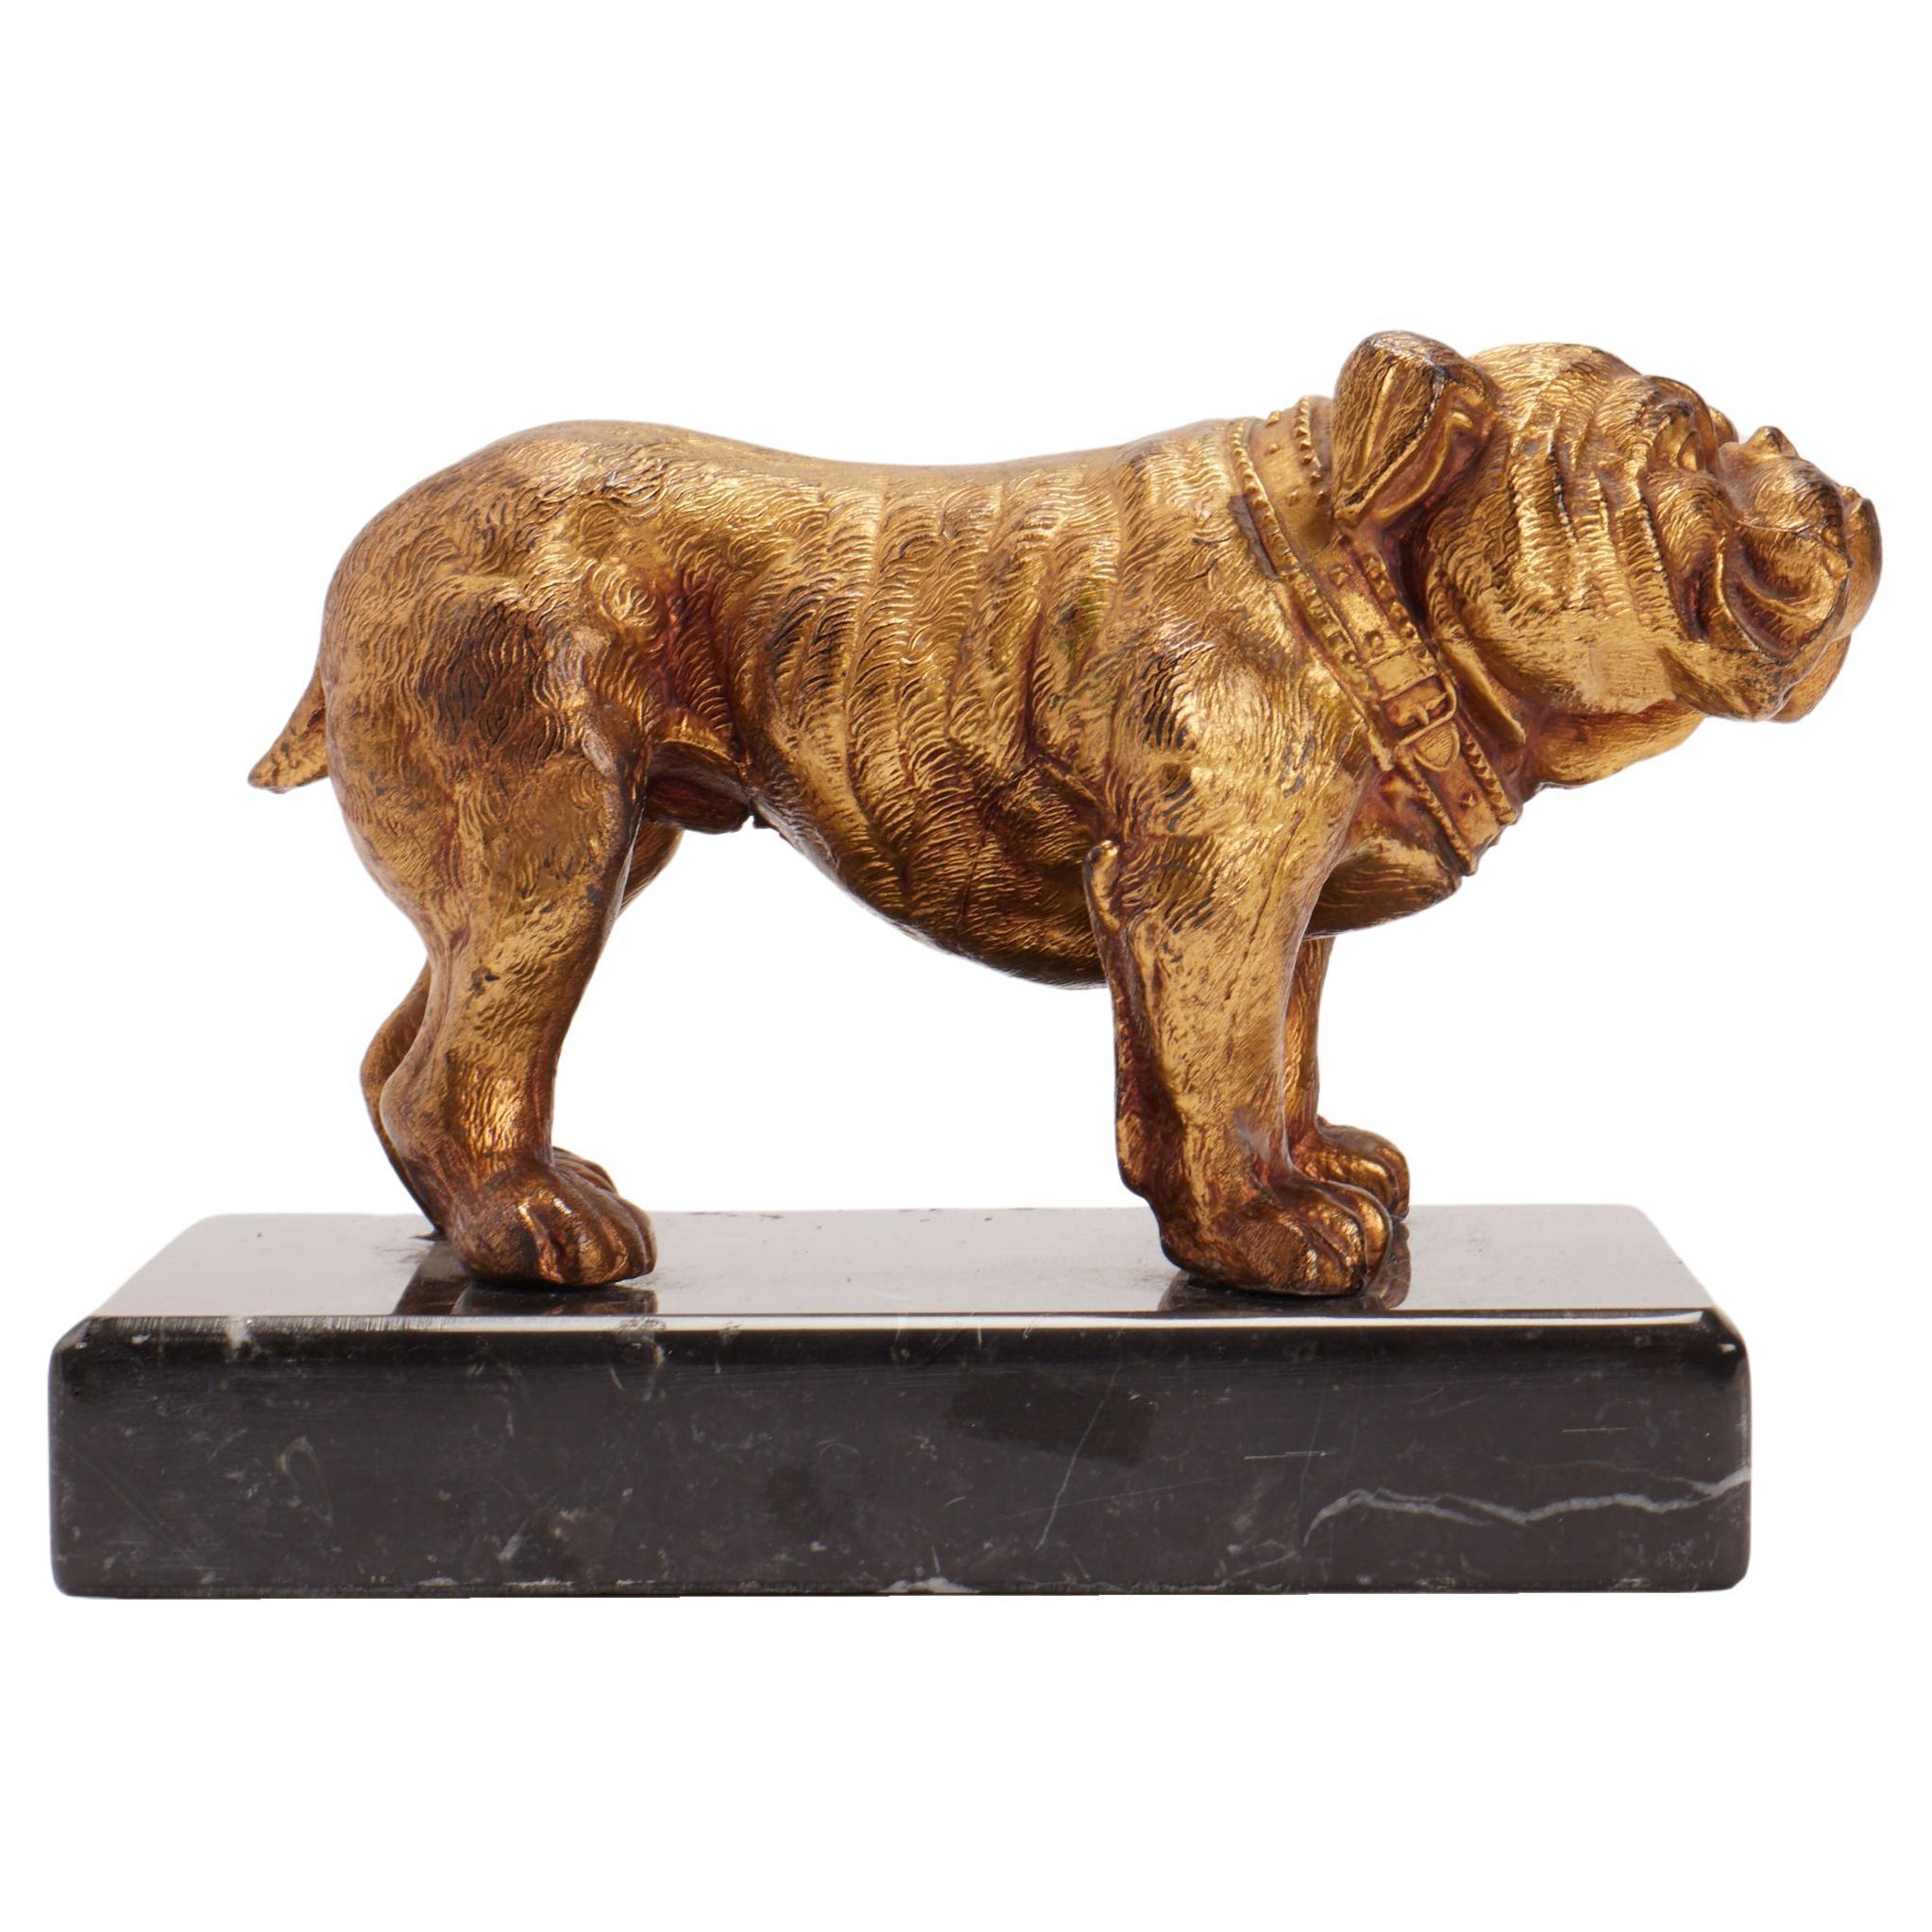 Bulldog dog sculpture signed J.B. Made in America late 19th century.  For Sale